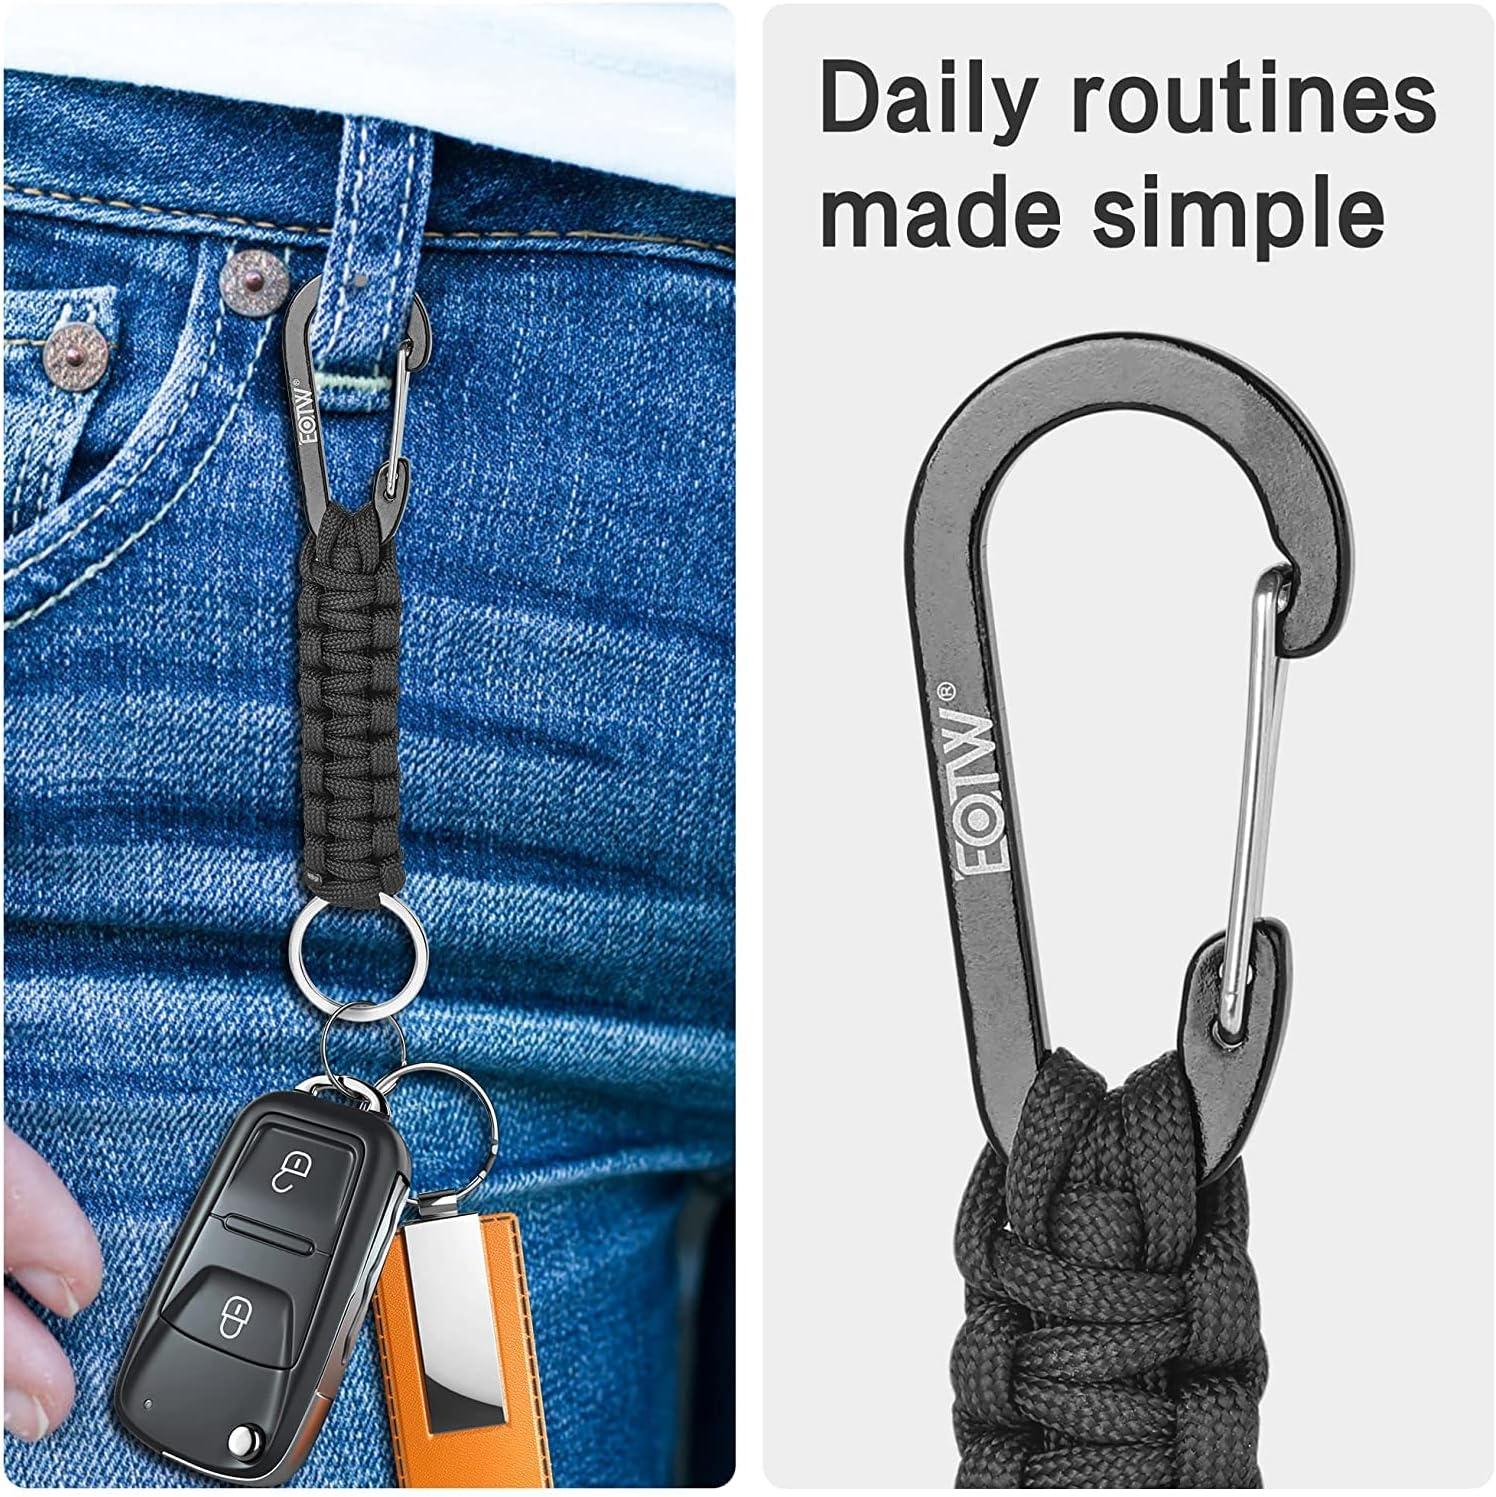 10 Best Carabiner Keychains to Clip Your Keys Into